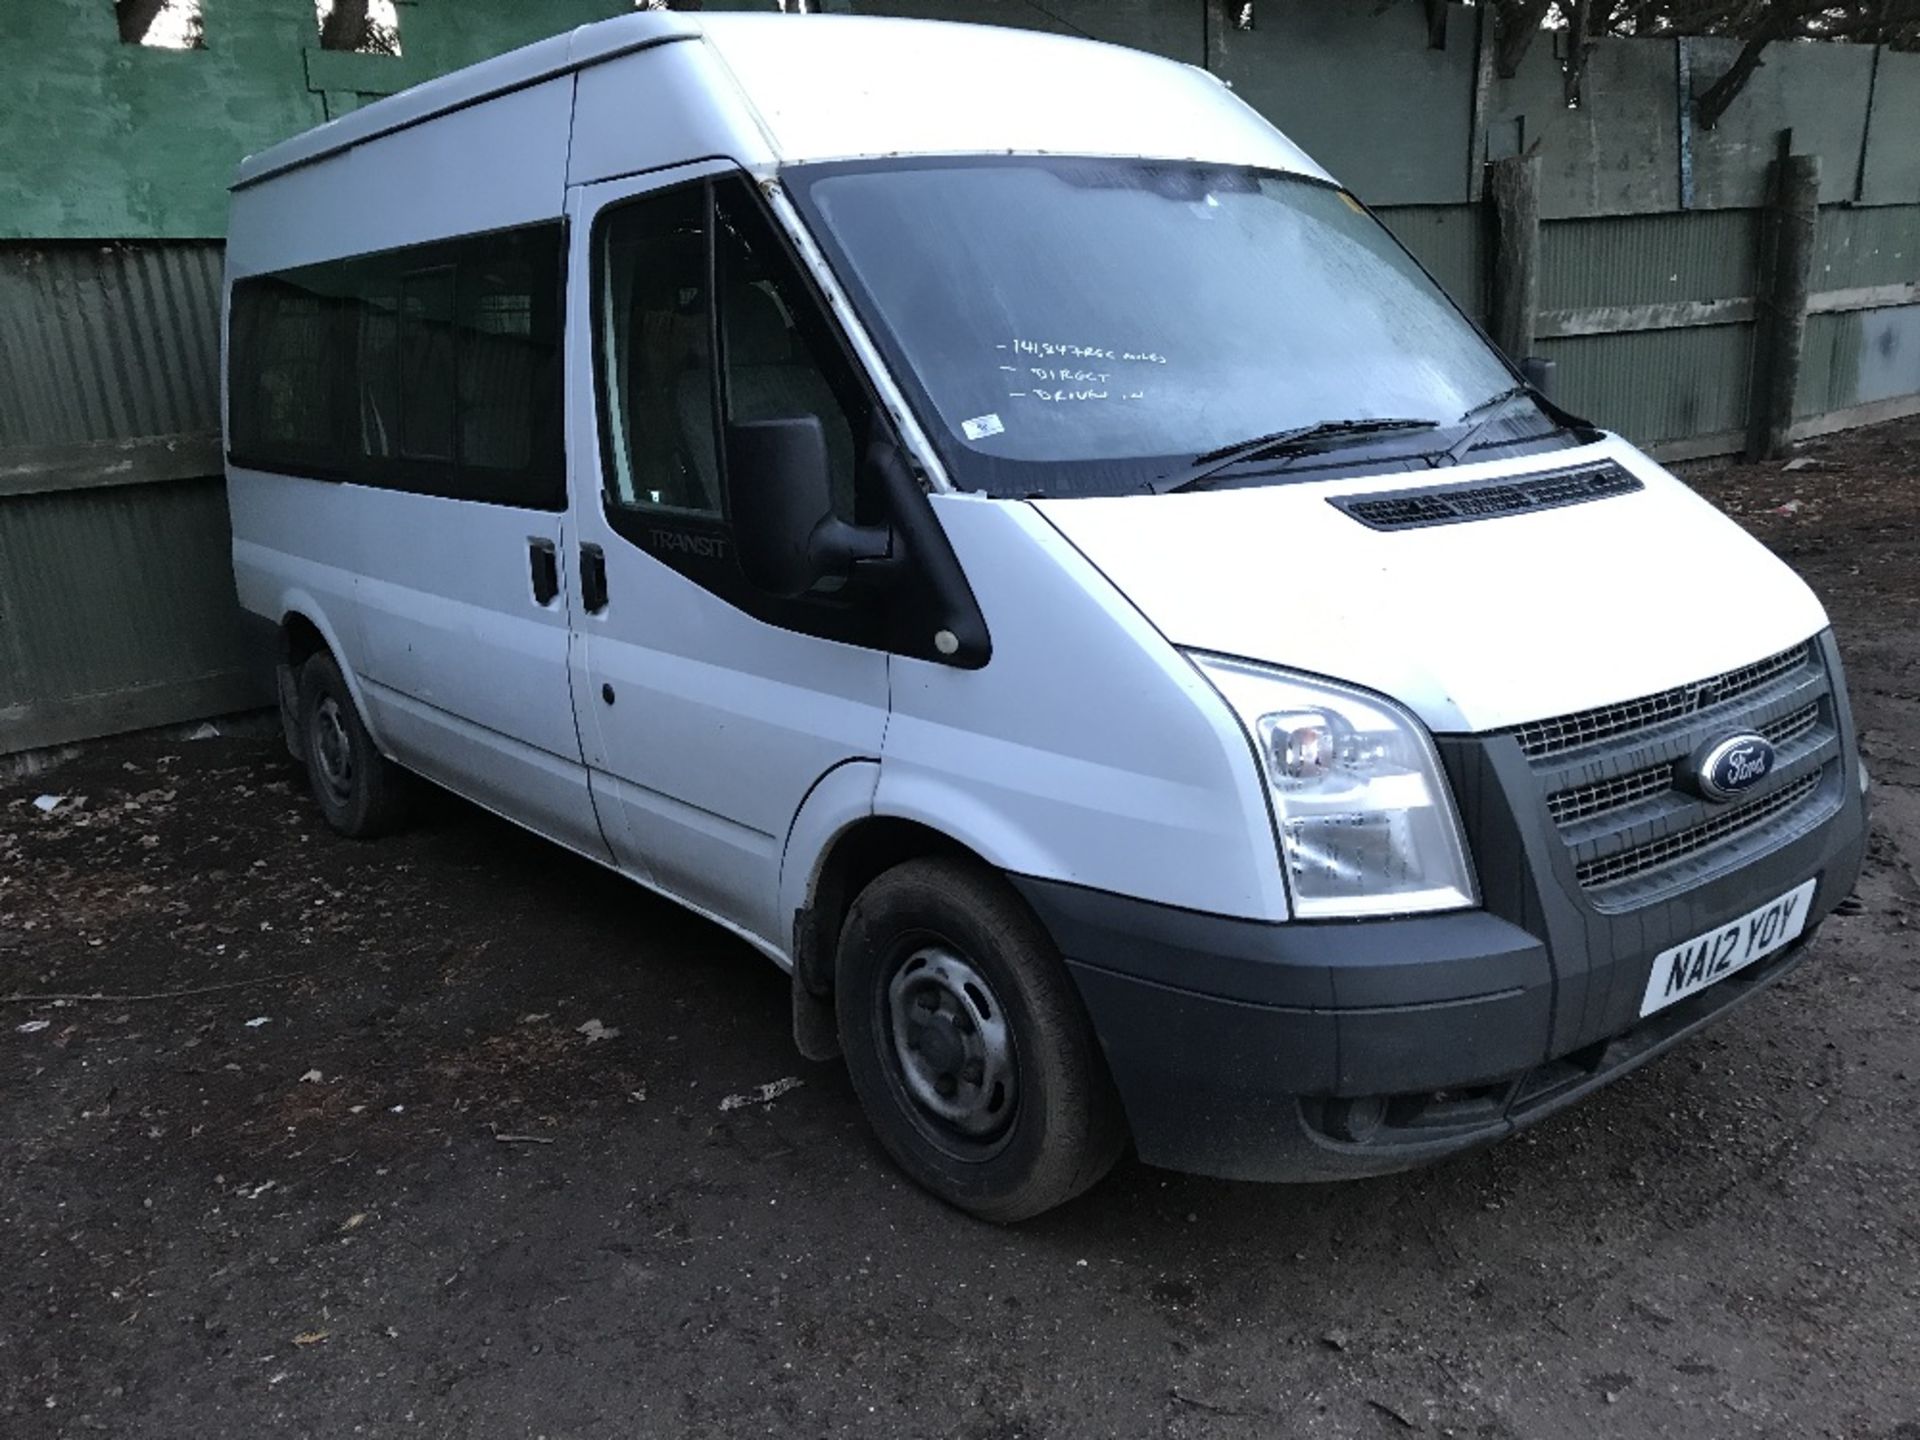 FORD TRANSIT 9 SEAT MINIBUS WITH REAR TOOL AREA, REG:NA12 YOY DIRECT FROM LOCAL COMPANY AS PART OF